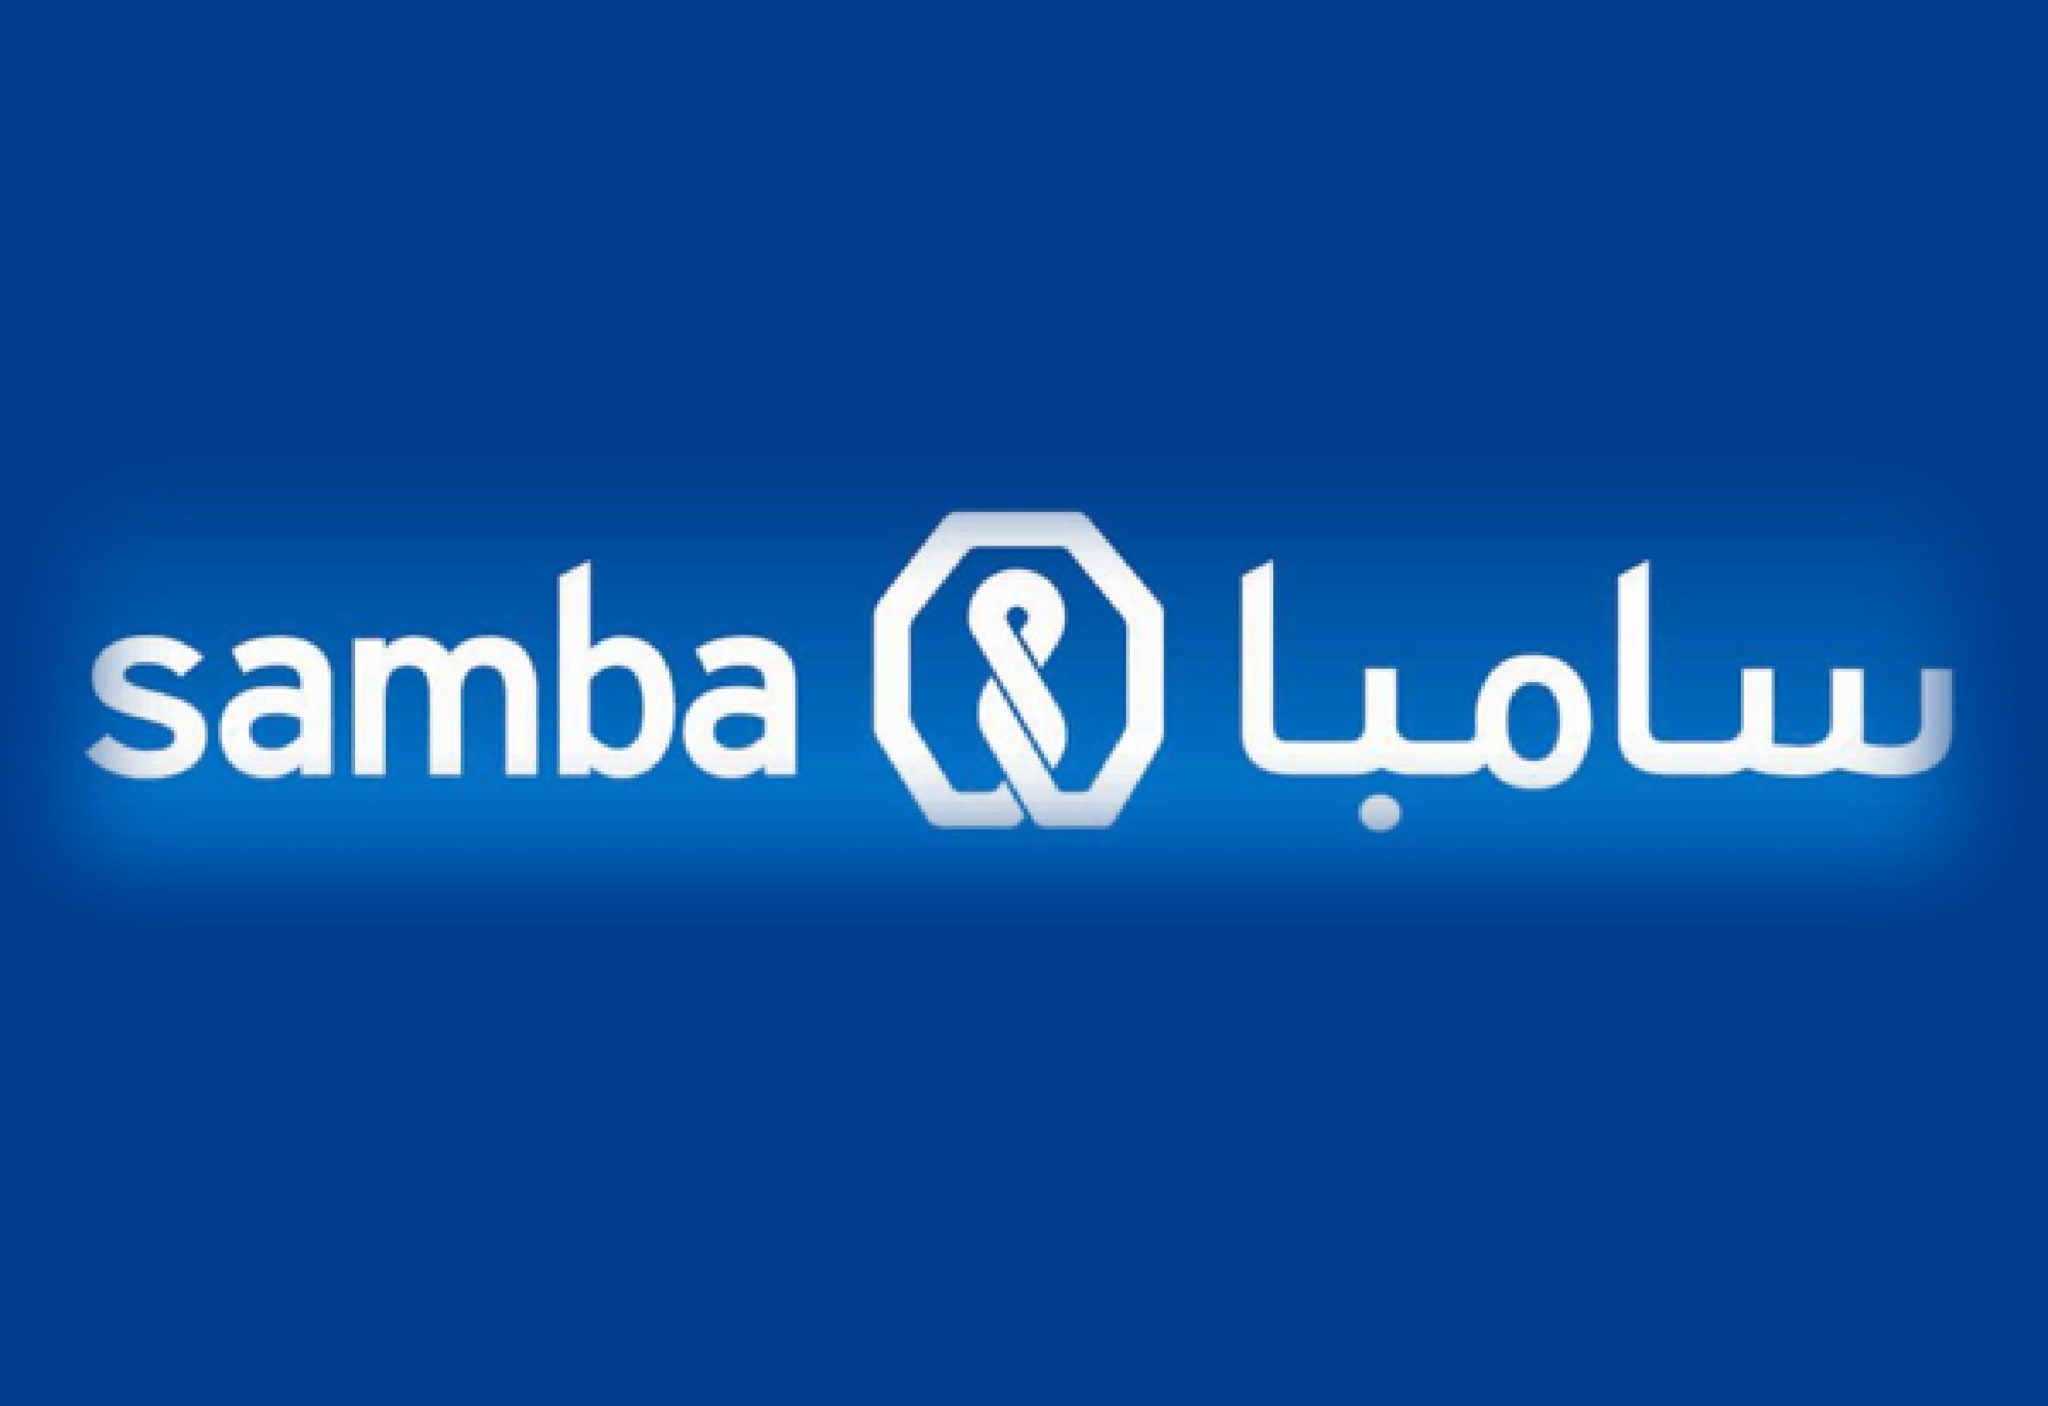 Samba Financial Group, ATM project, automated teller machines, cctv, cctv monitoring, security, security design, risk, threat, risk assessment, surveillance, control room, security design, security systems, europe, middle east, south asia, saudi arabia